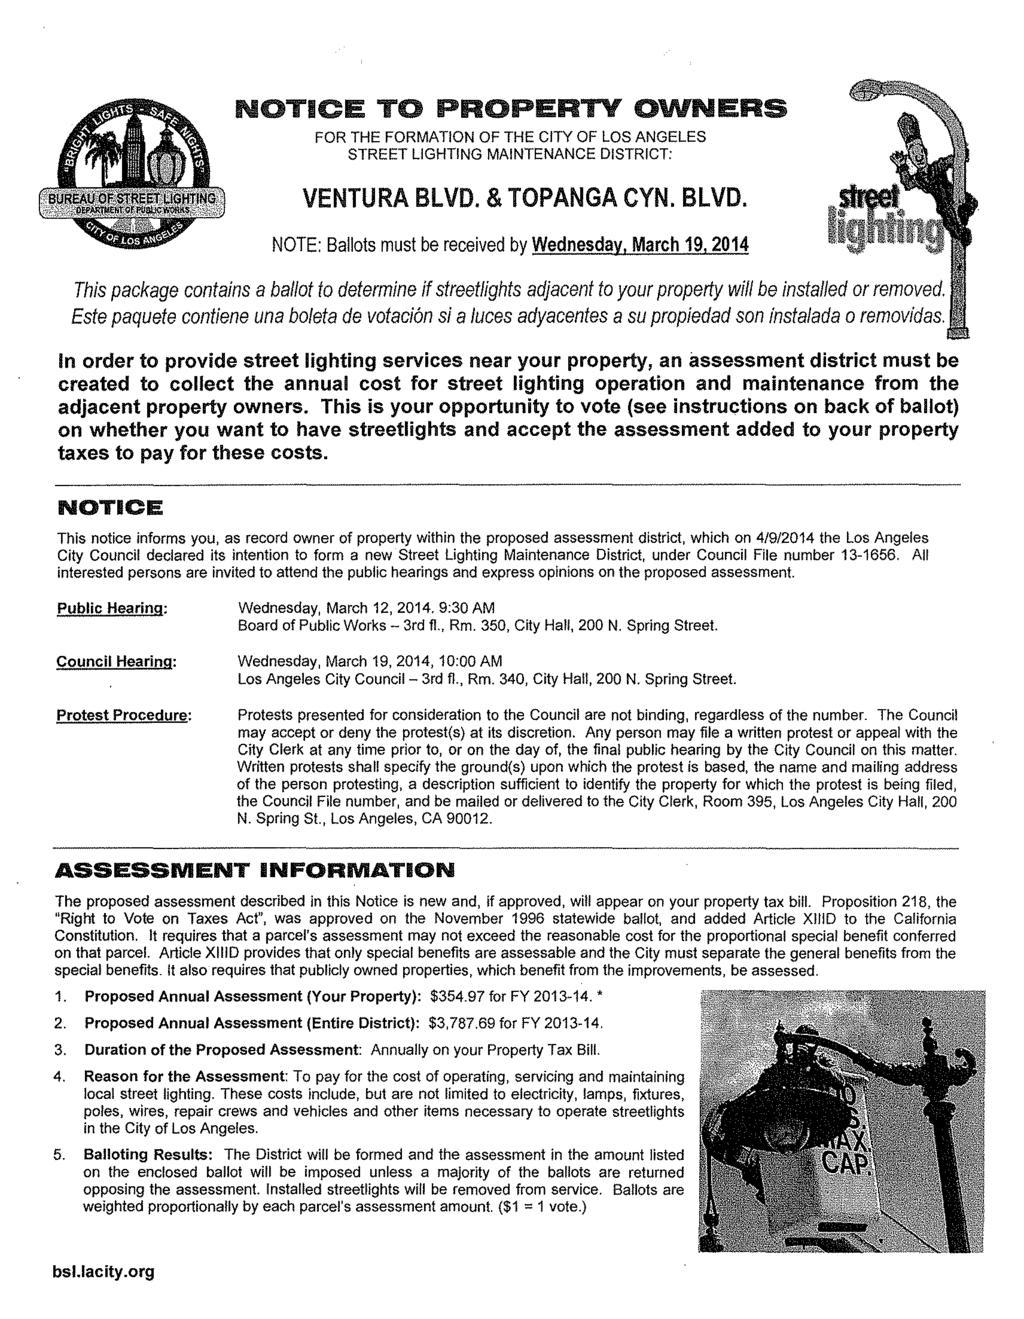 NOTICE TO PROPERTY OWNERS FOR THE FORMATION OF THE CITY OF LOS ANGELES STREET LIGHTING MAINTENANCE DISTRICT: VENTURA BLVD.